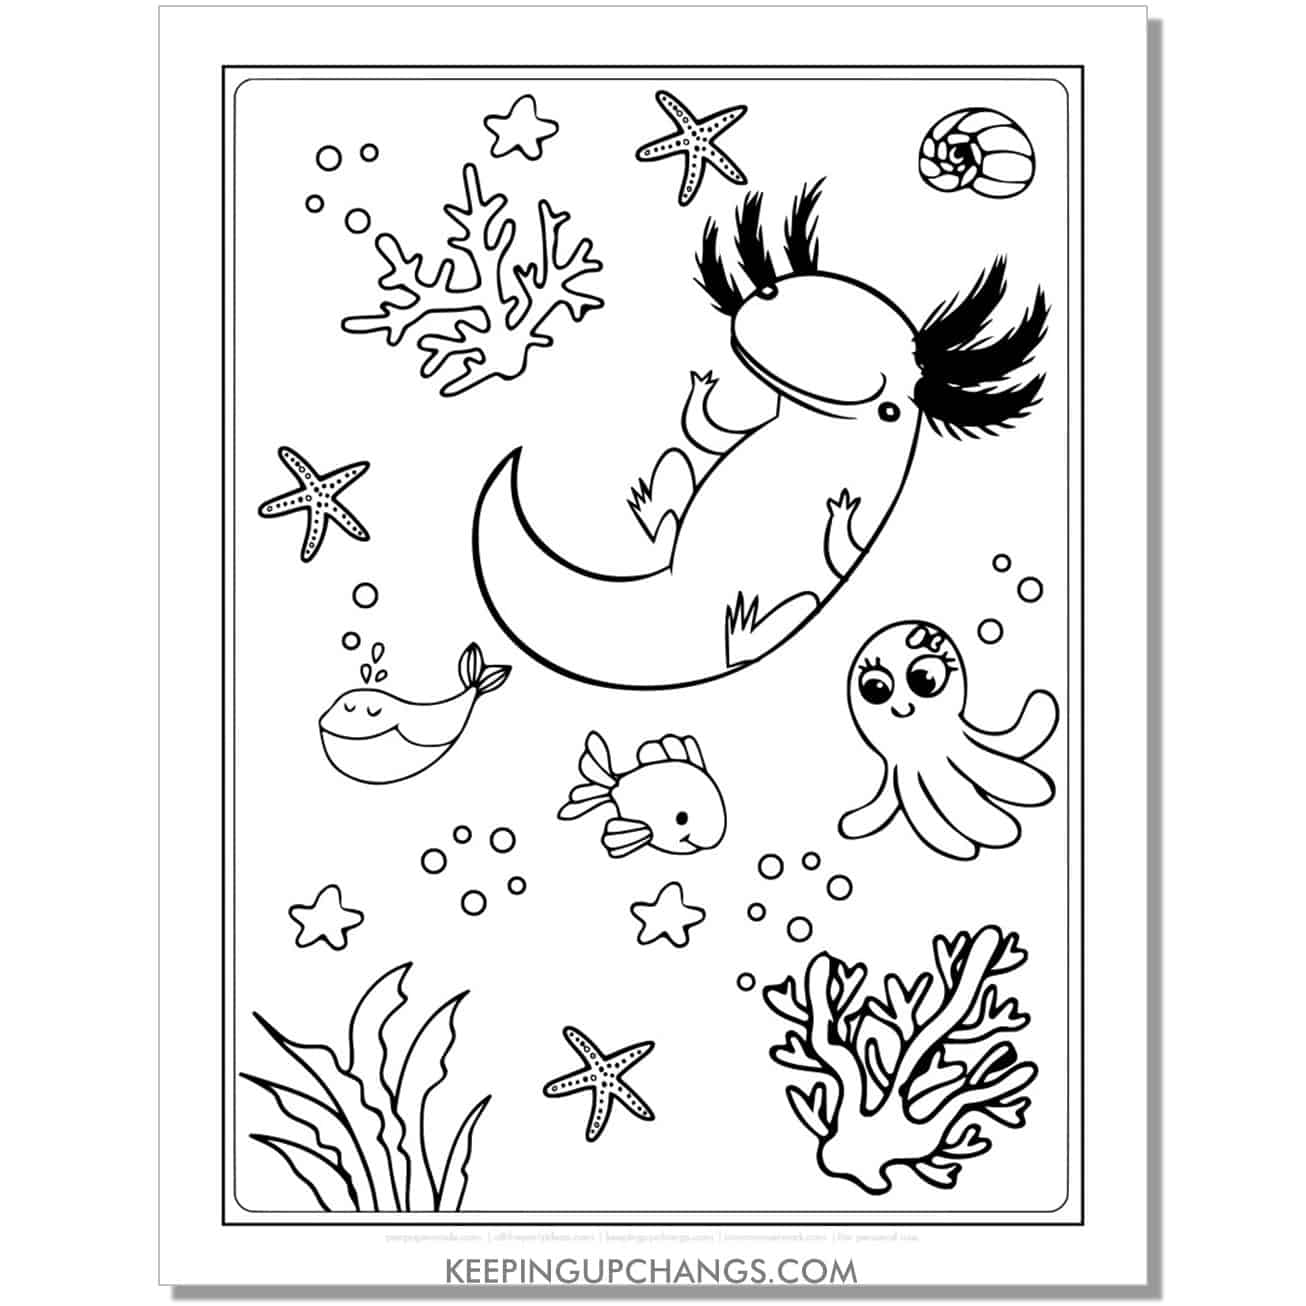 free floating axolotl coloring page with octopus, starfish, whale.